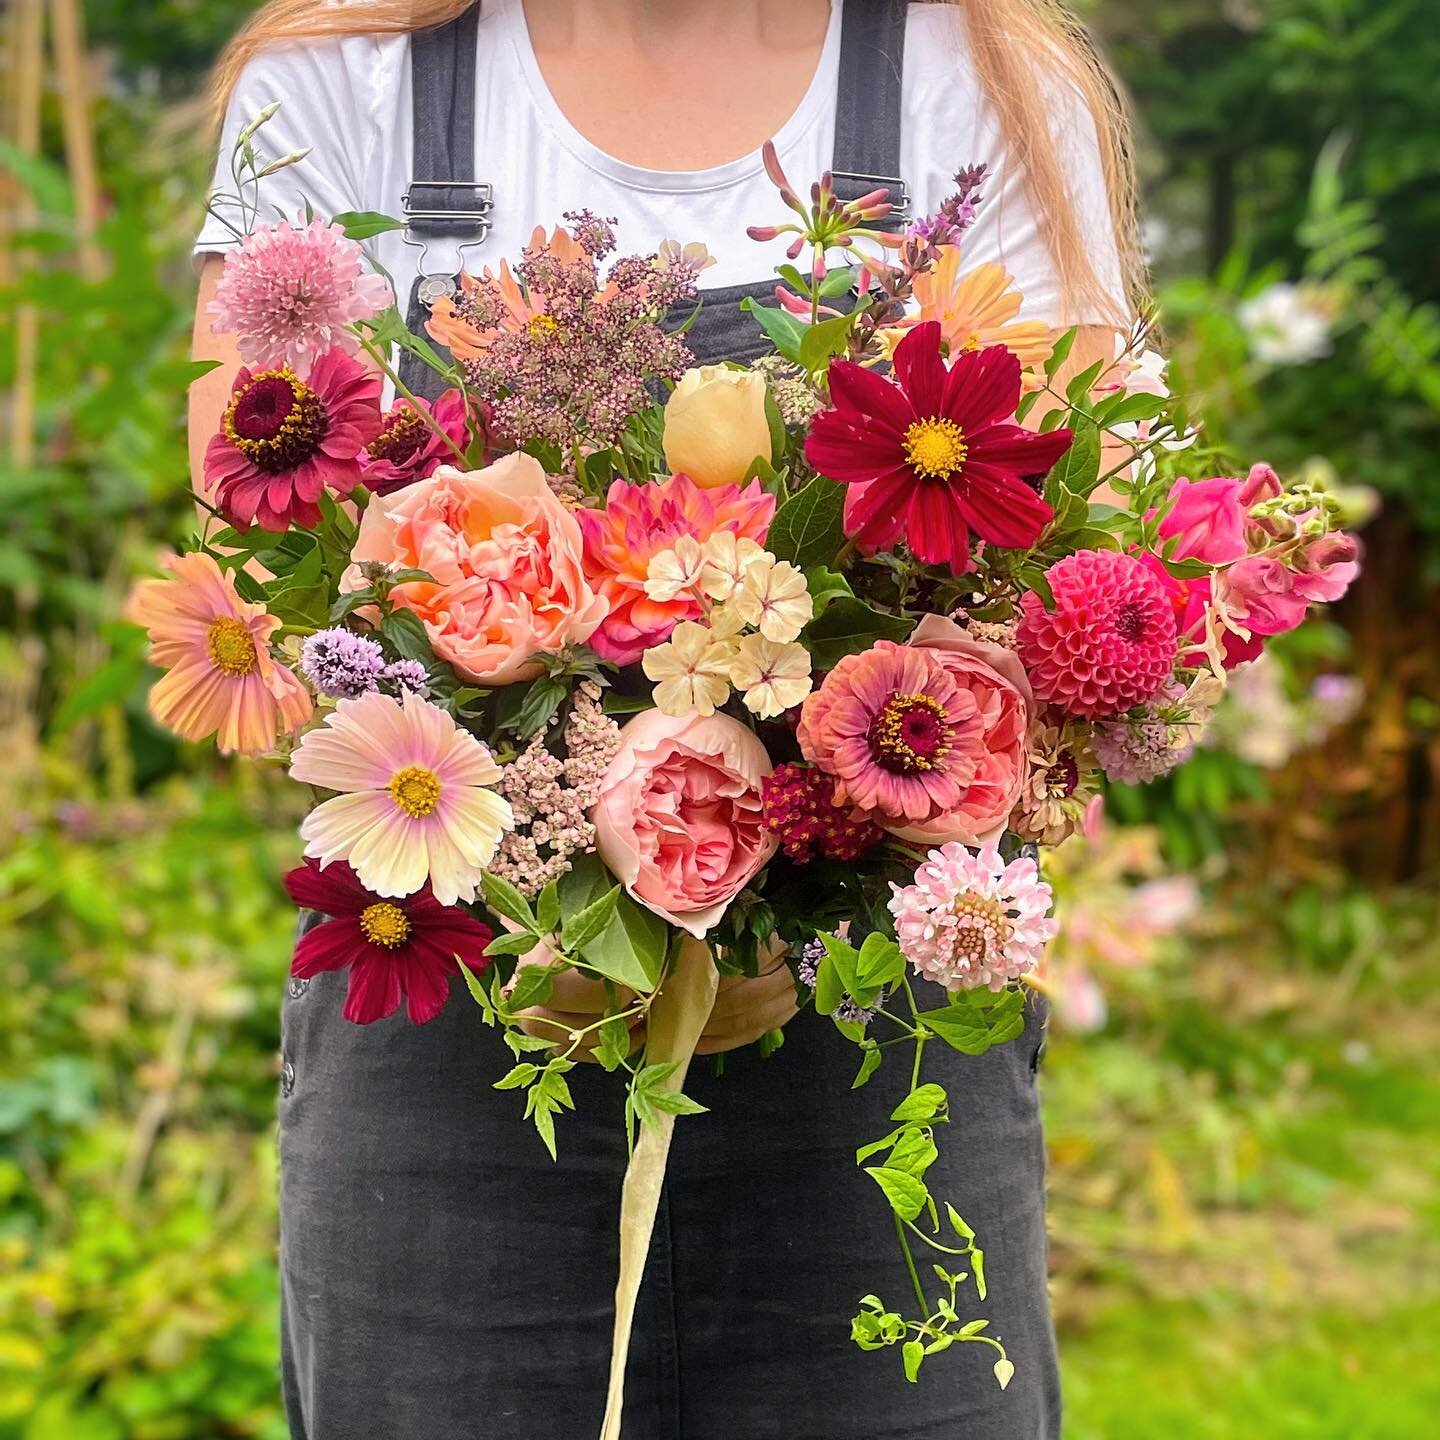 For Lucy ✨ 

This was a special one - full of all the colours of late Summer, scented with mint and honeysuckle, and featuring a flower with special meaning, for the bride to hold close to her heart ❤️

Wishing Lucy and Robin all the happiness 💫

#b